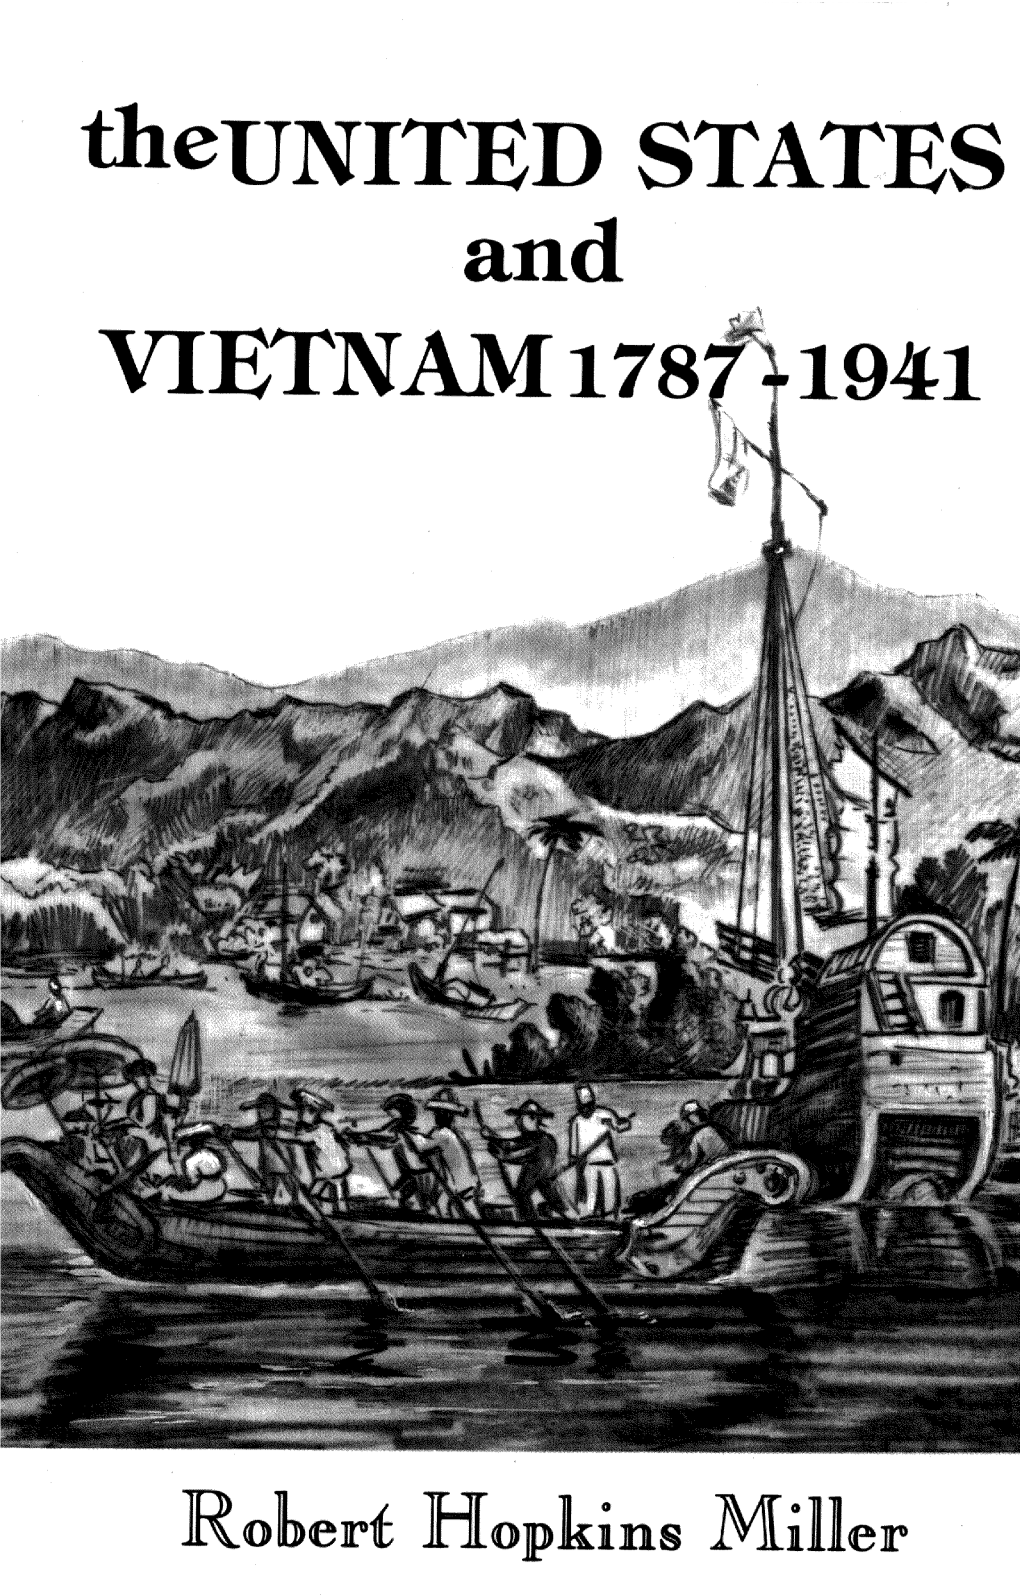 The UNITED STATES and VIETNAM 1787-1941